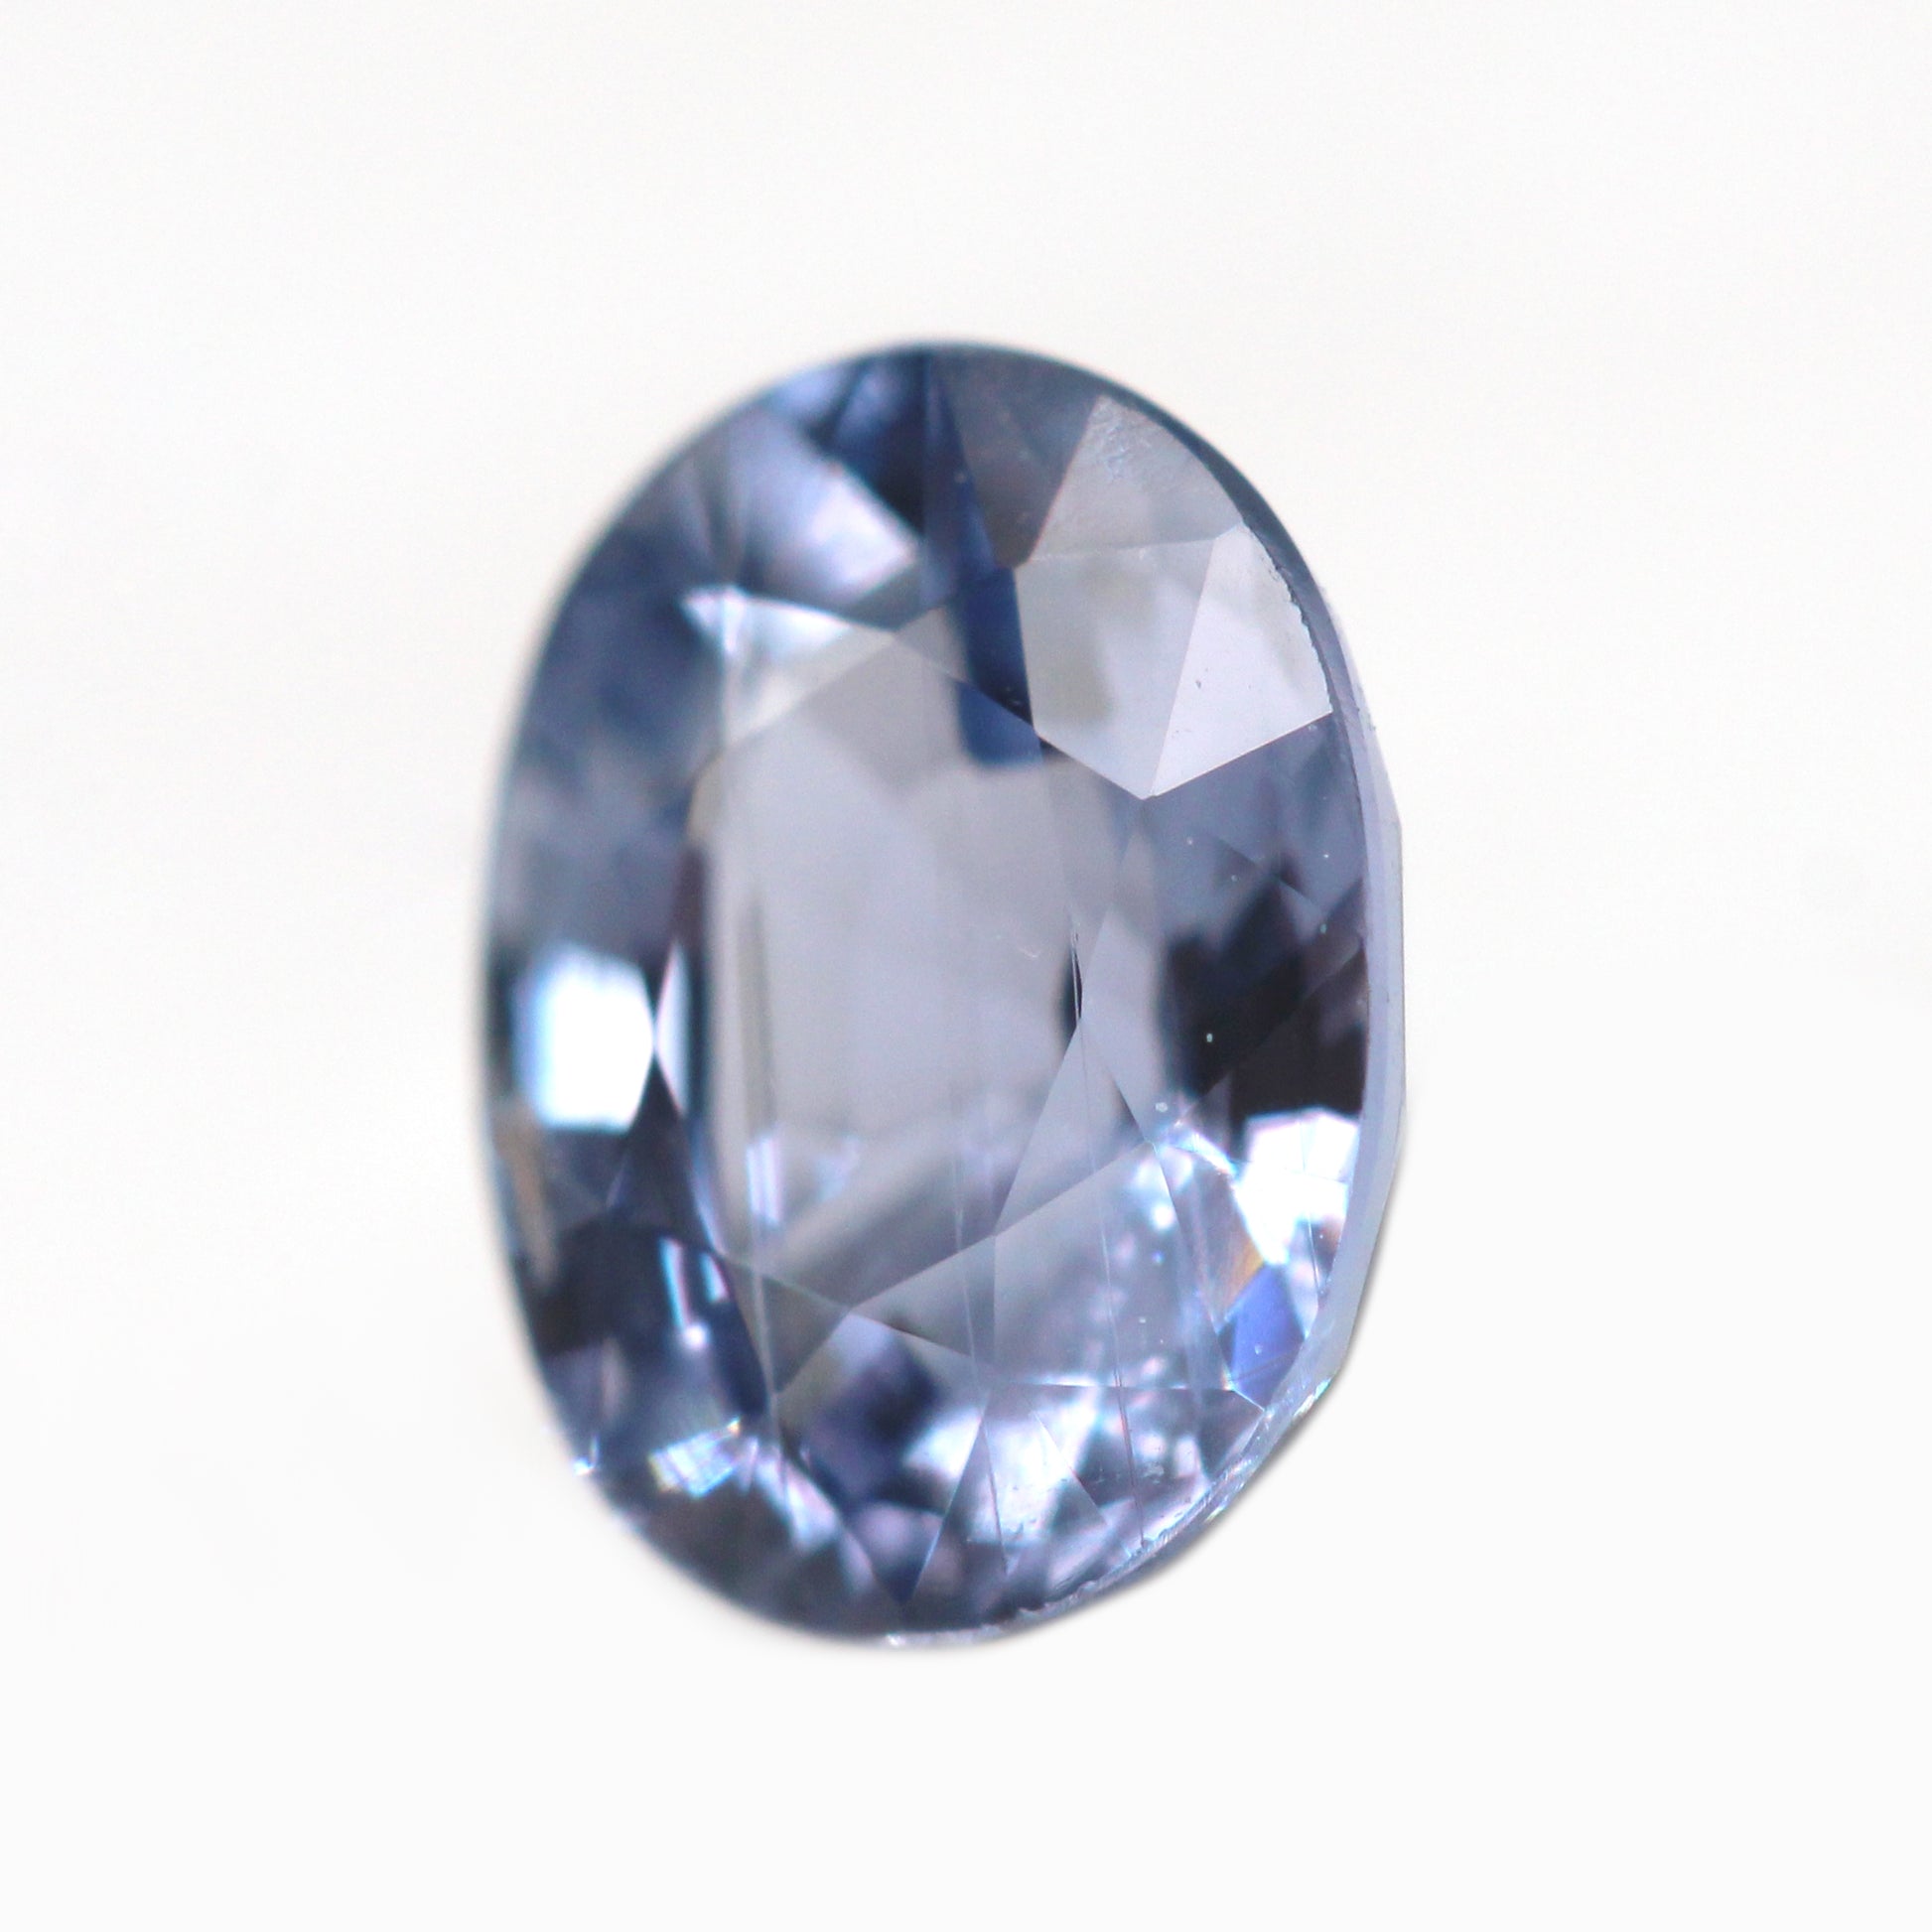 0.63 Carat Oval Periwinkle Blue Montana Sapphire for Custom Work - Inventory Code BOS063 - Midwinter Co. Alternative Bridal Rings and Modern Fine Jewelry